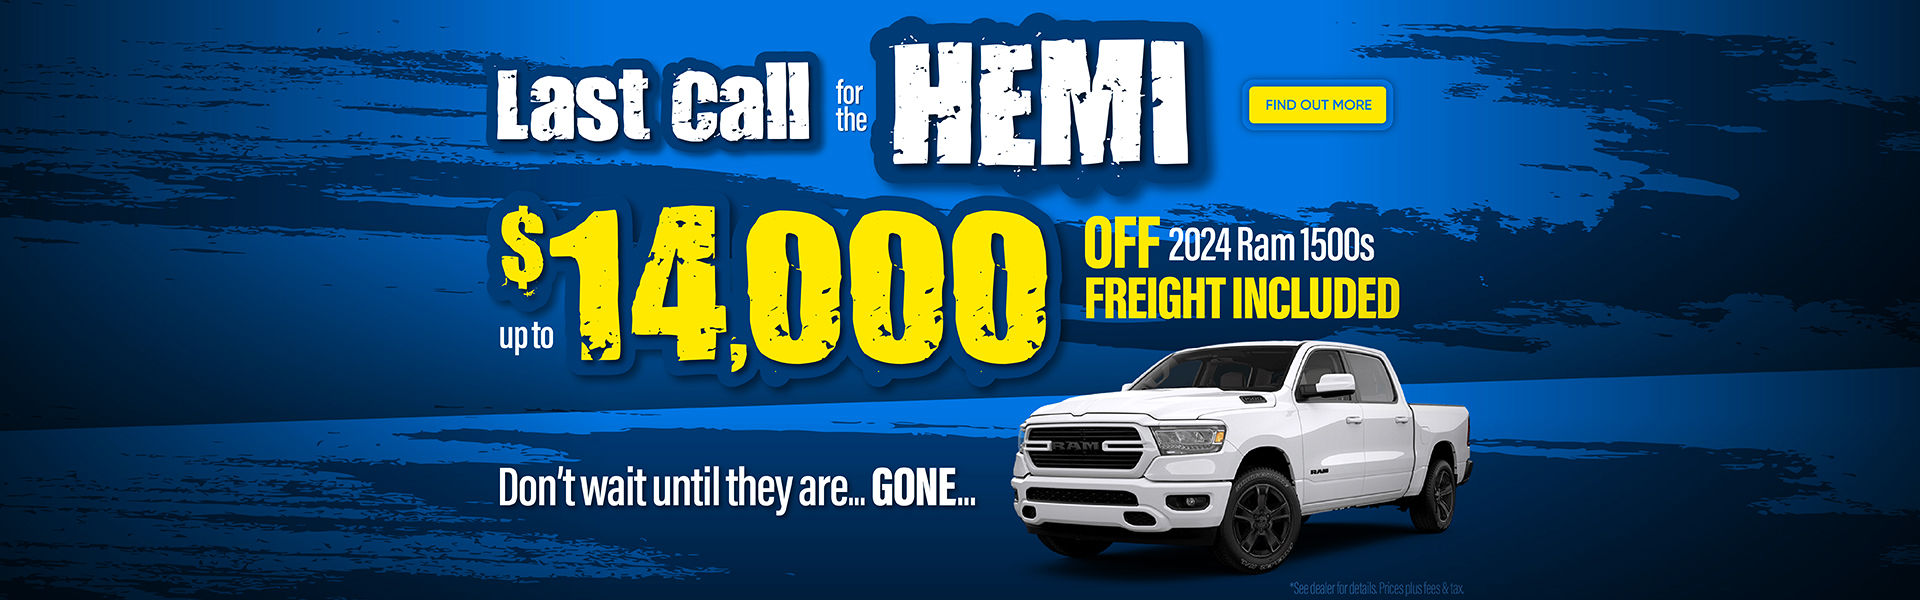 t's the last call for the HemI